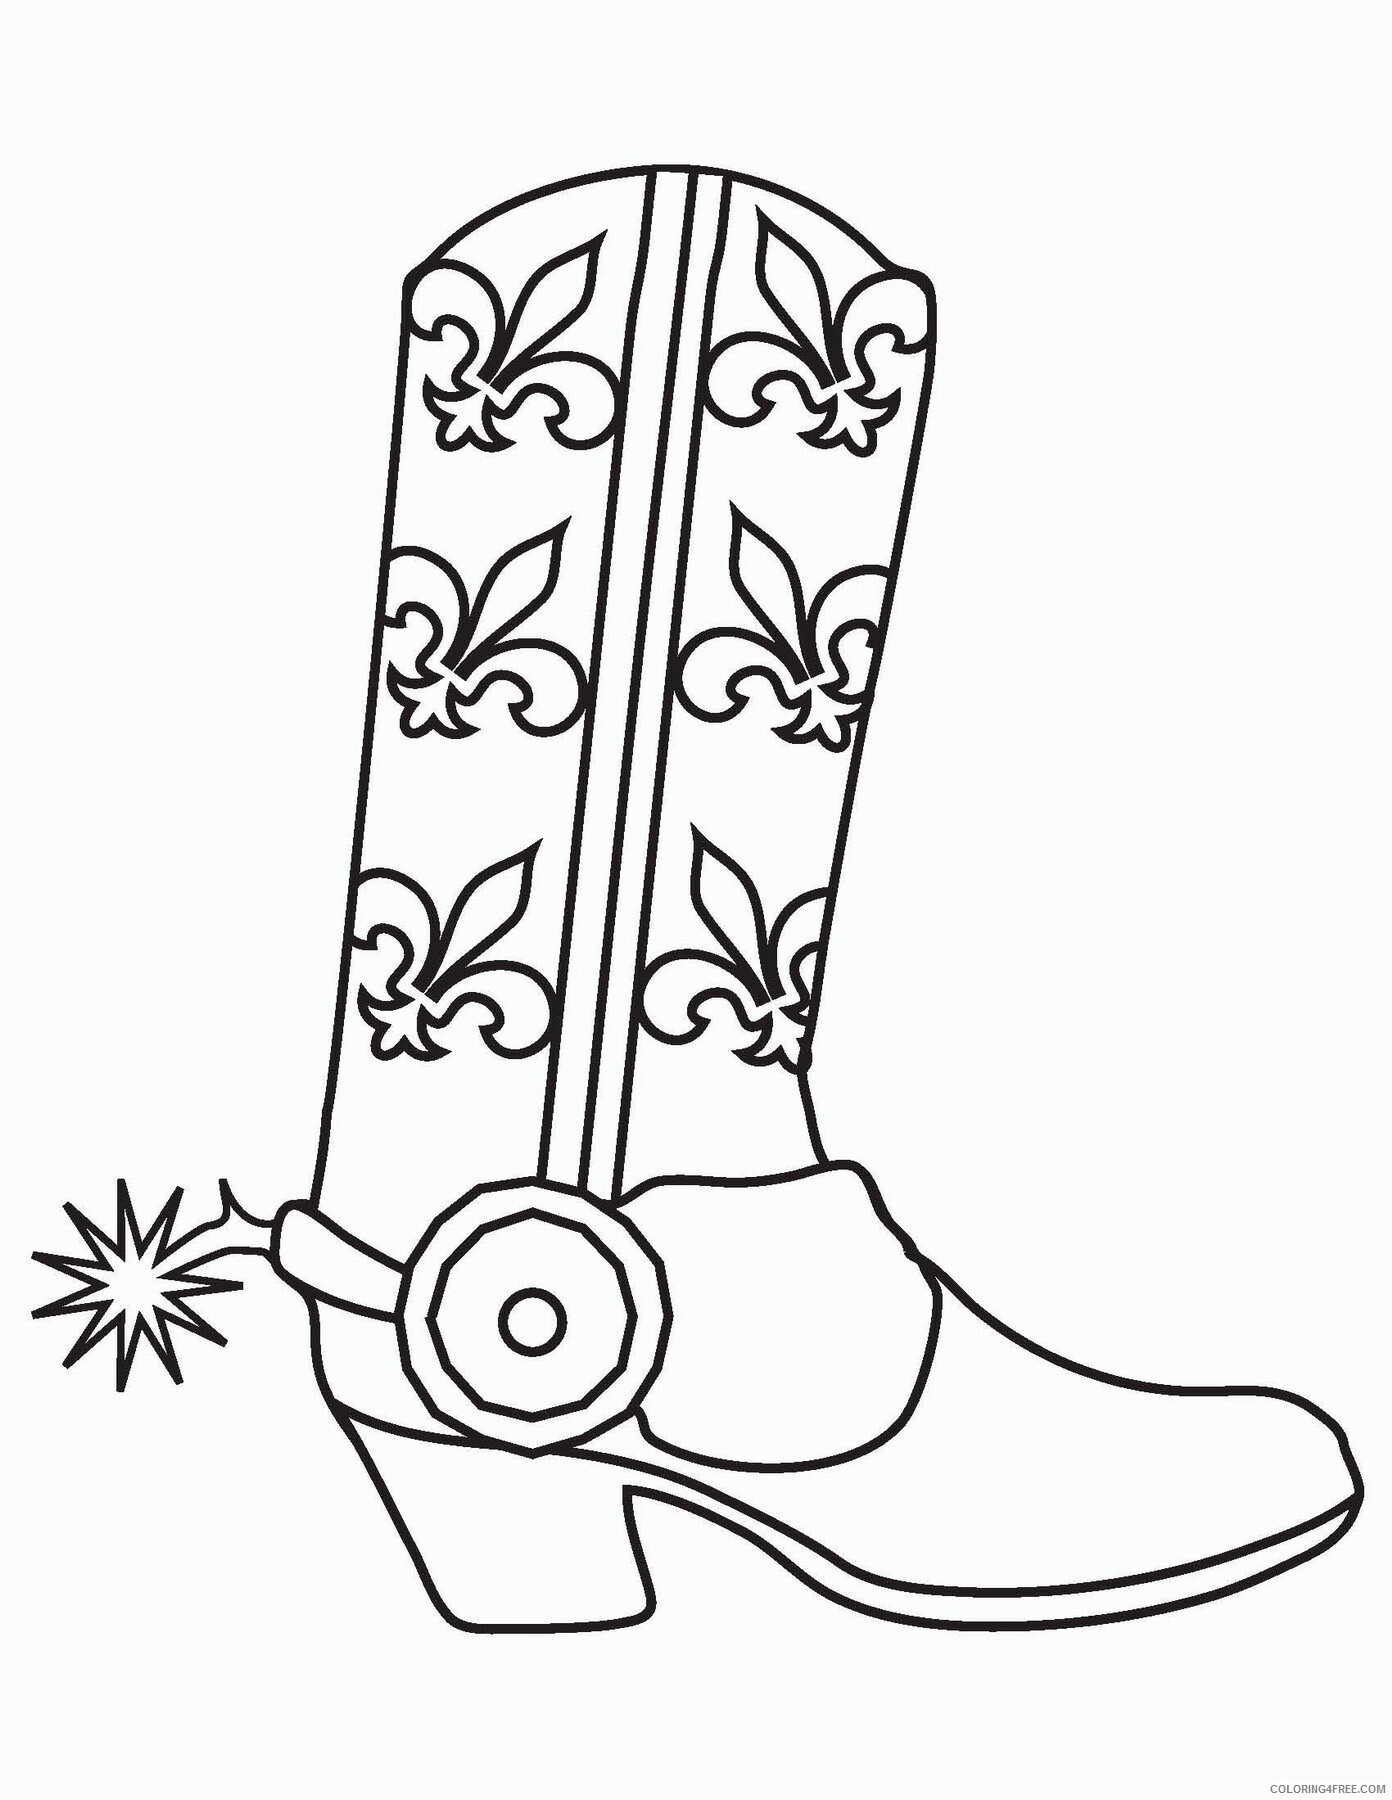 Cowboy Coloring Pages for boys cowboy_02 Printable 2020 0180 Coloring4free